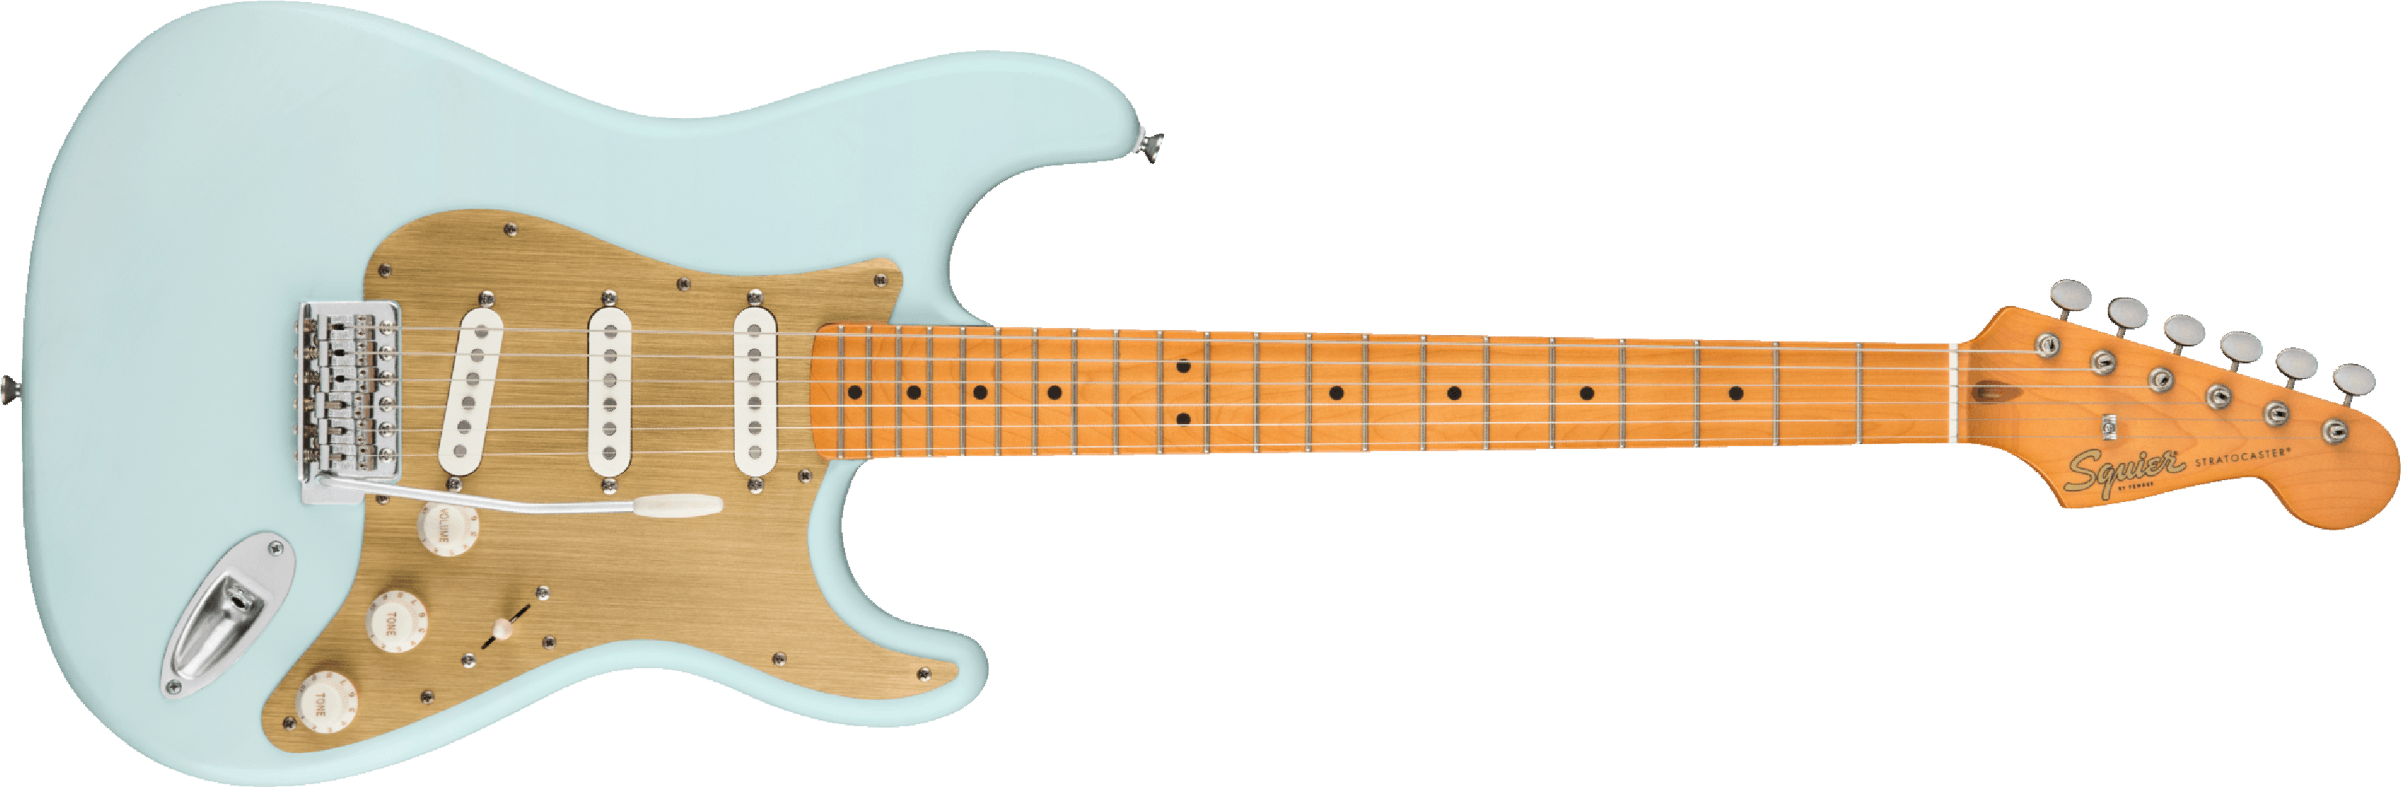 Squier Strat 40th Anniversary Vintage Edition Mn - Satin Sonic Blue - Str shape electric guitar - Main picture